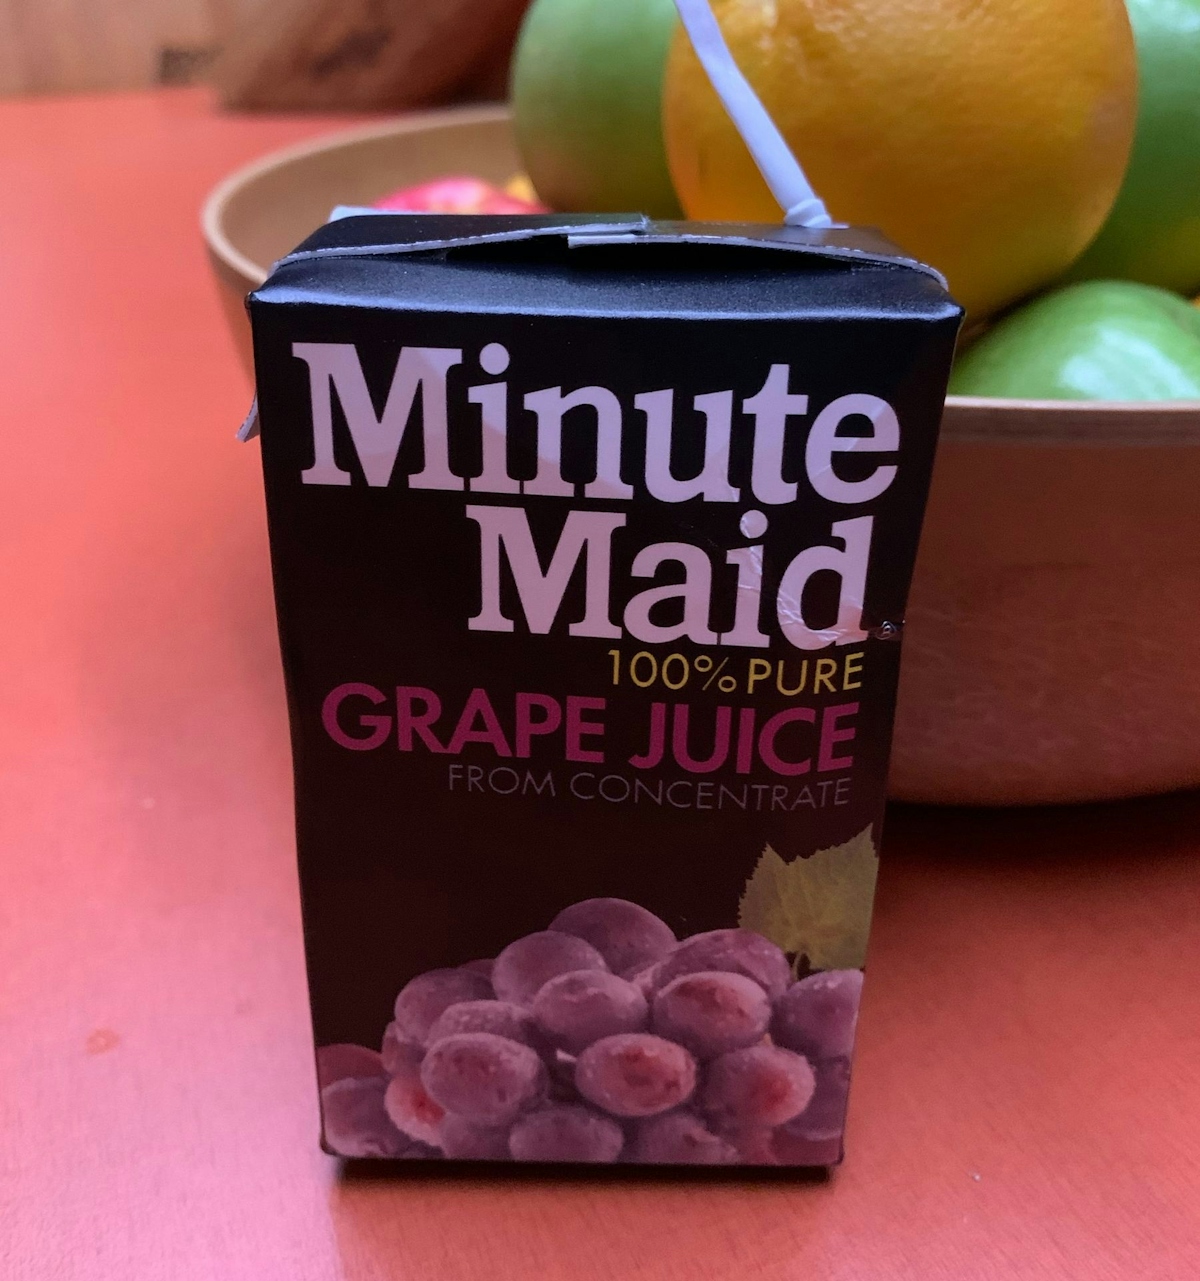 Believe it or not, this juice box may have a secret meaning